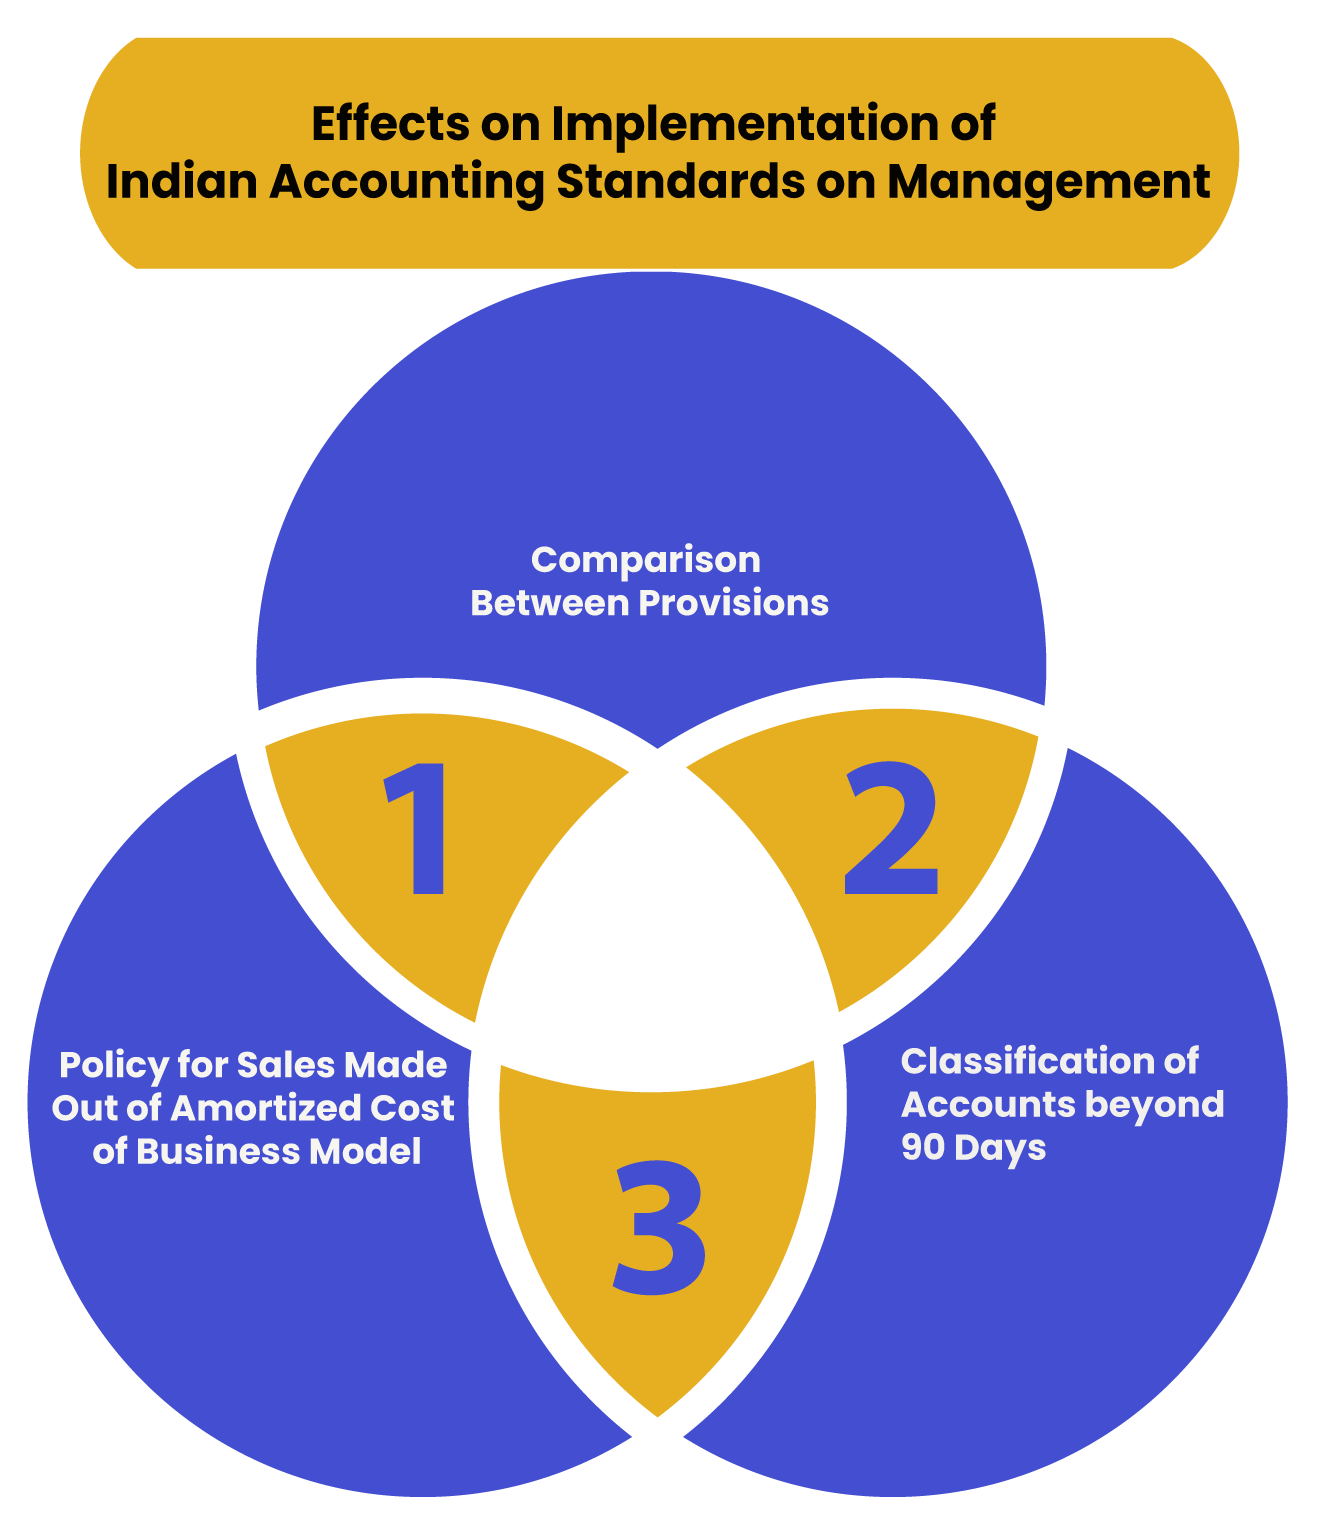 phd in accounting in india